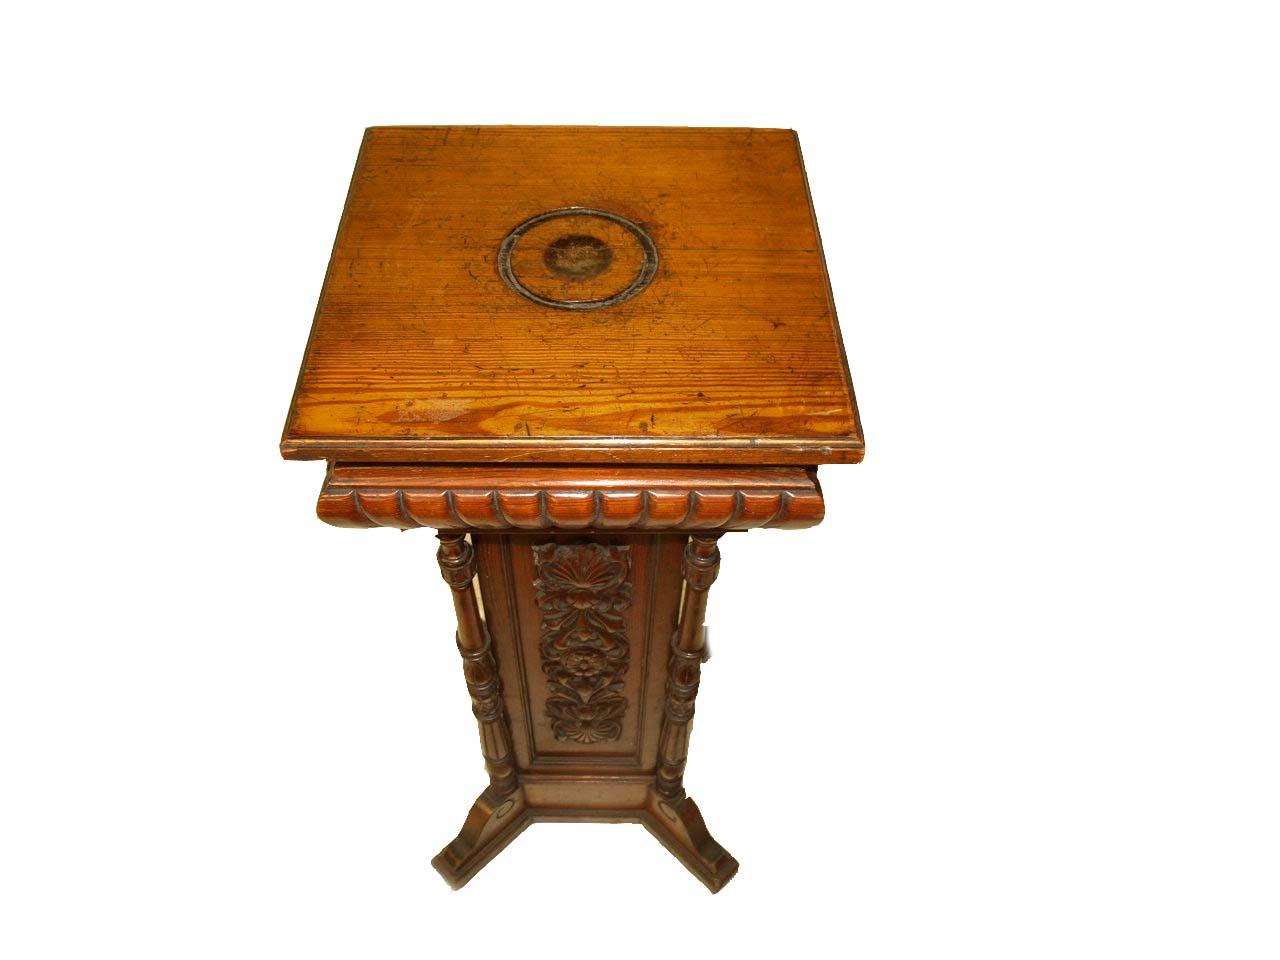 English ''pitch'' pine carved pedestal, this four sided piece has a plain top with engraved circle above a gadrooned frieze, supported by turned balusters at each corner, the square shaft has intricate and detailed carving in relief, the pedestal